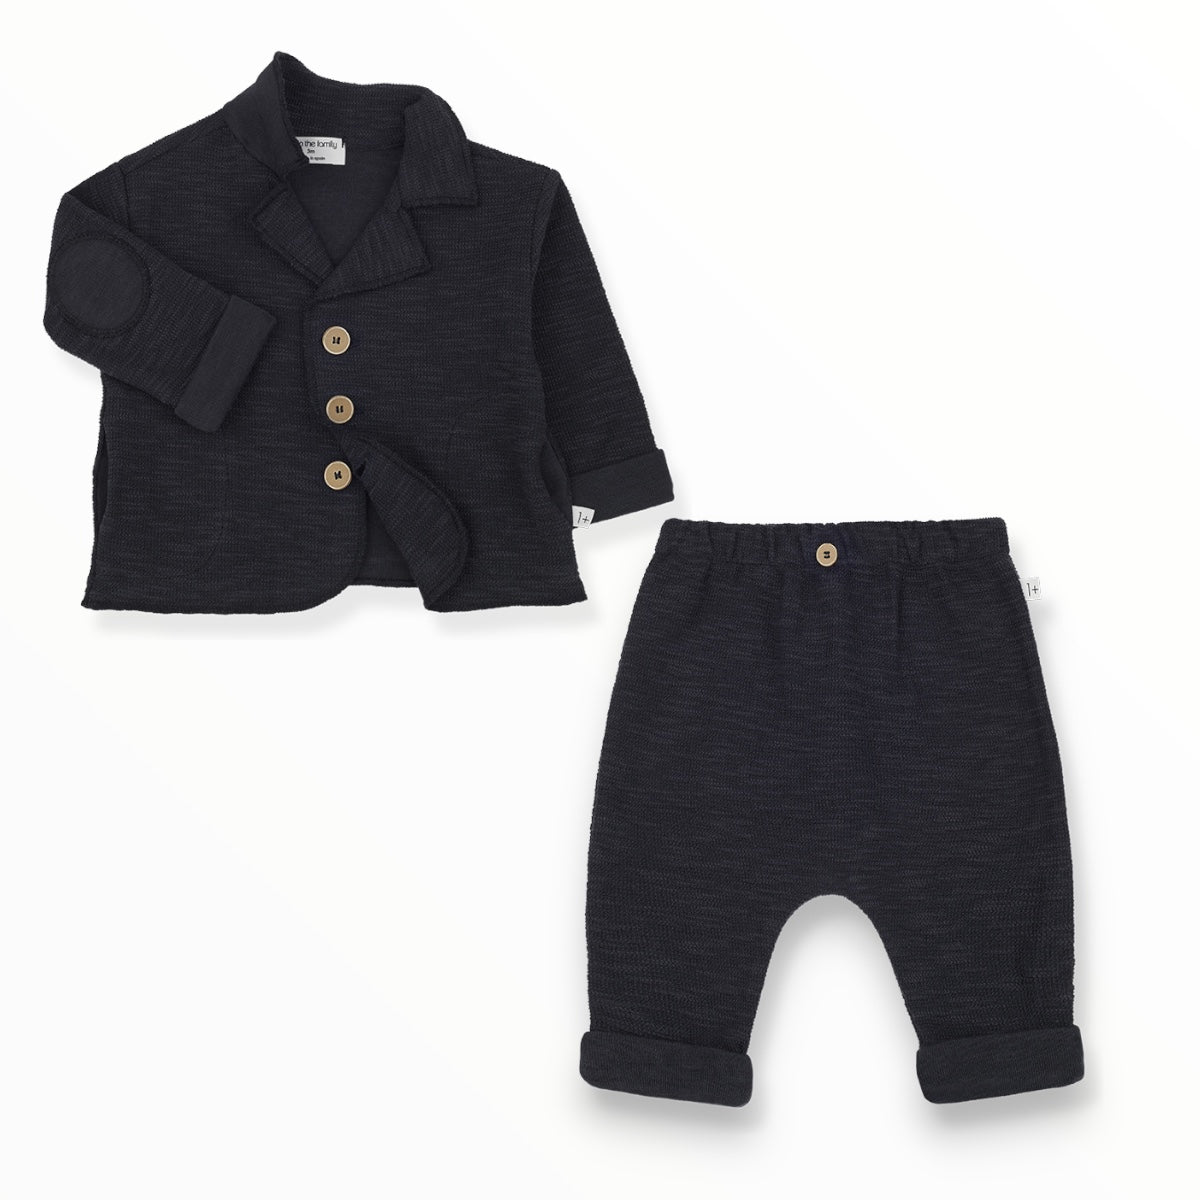 1+ IN THE FAMILY SABINO BLAZER AND VITO PANT - ANTHRACITE